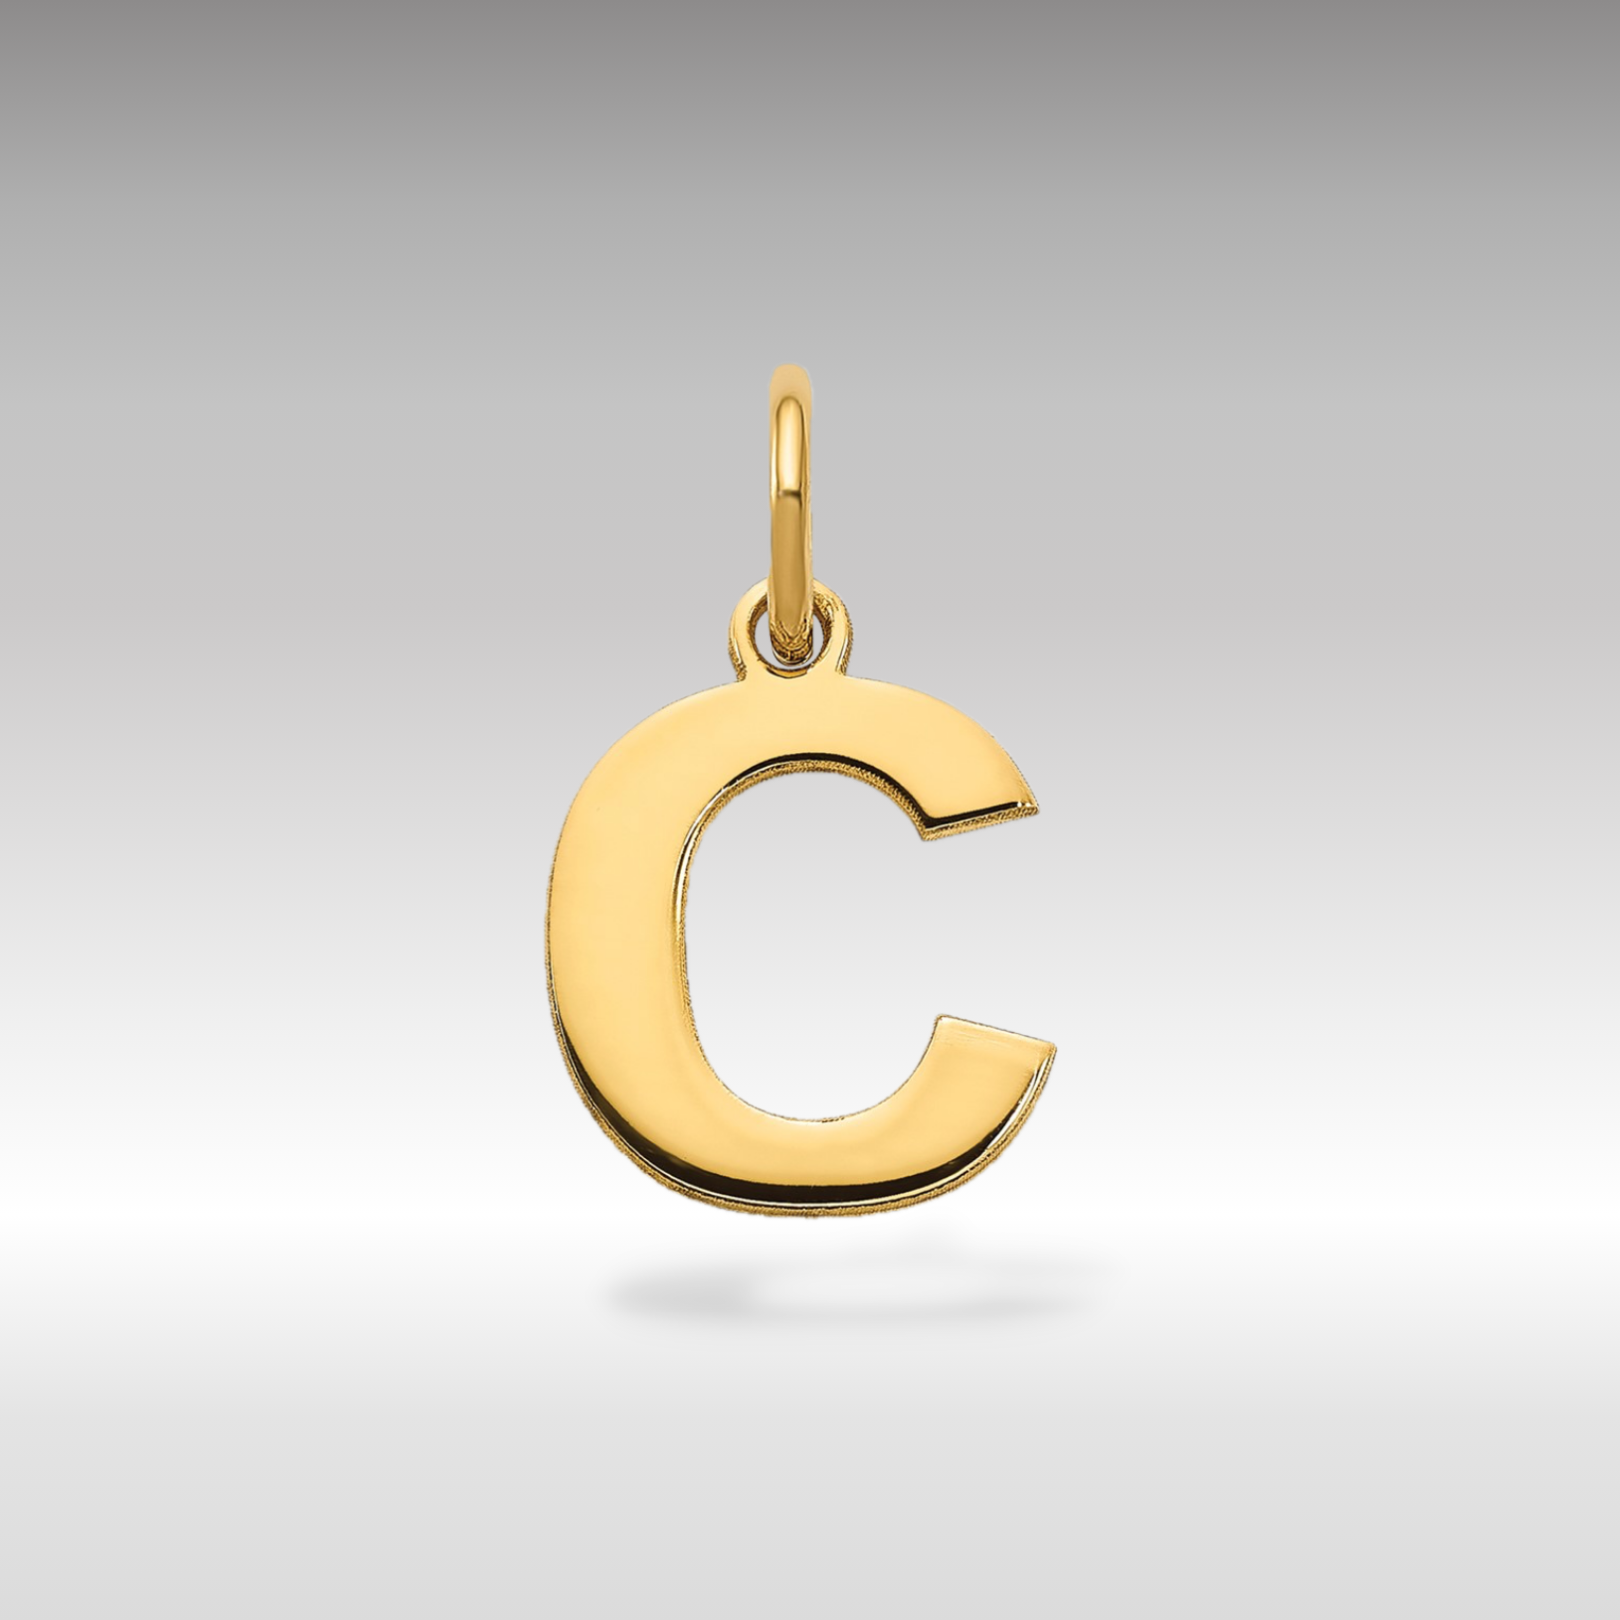 14K Gold Block Letter "C" Initial Pendant - Charlie & Co. Jewelry